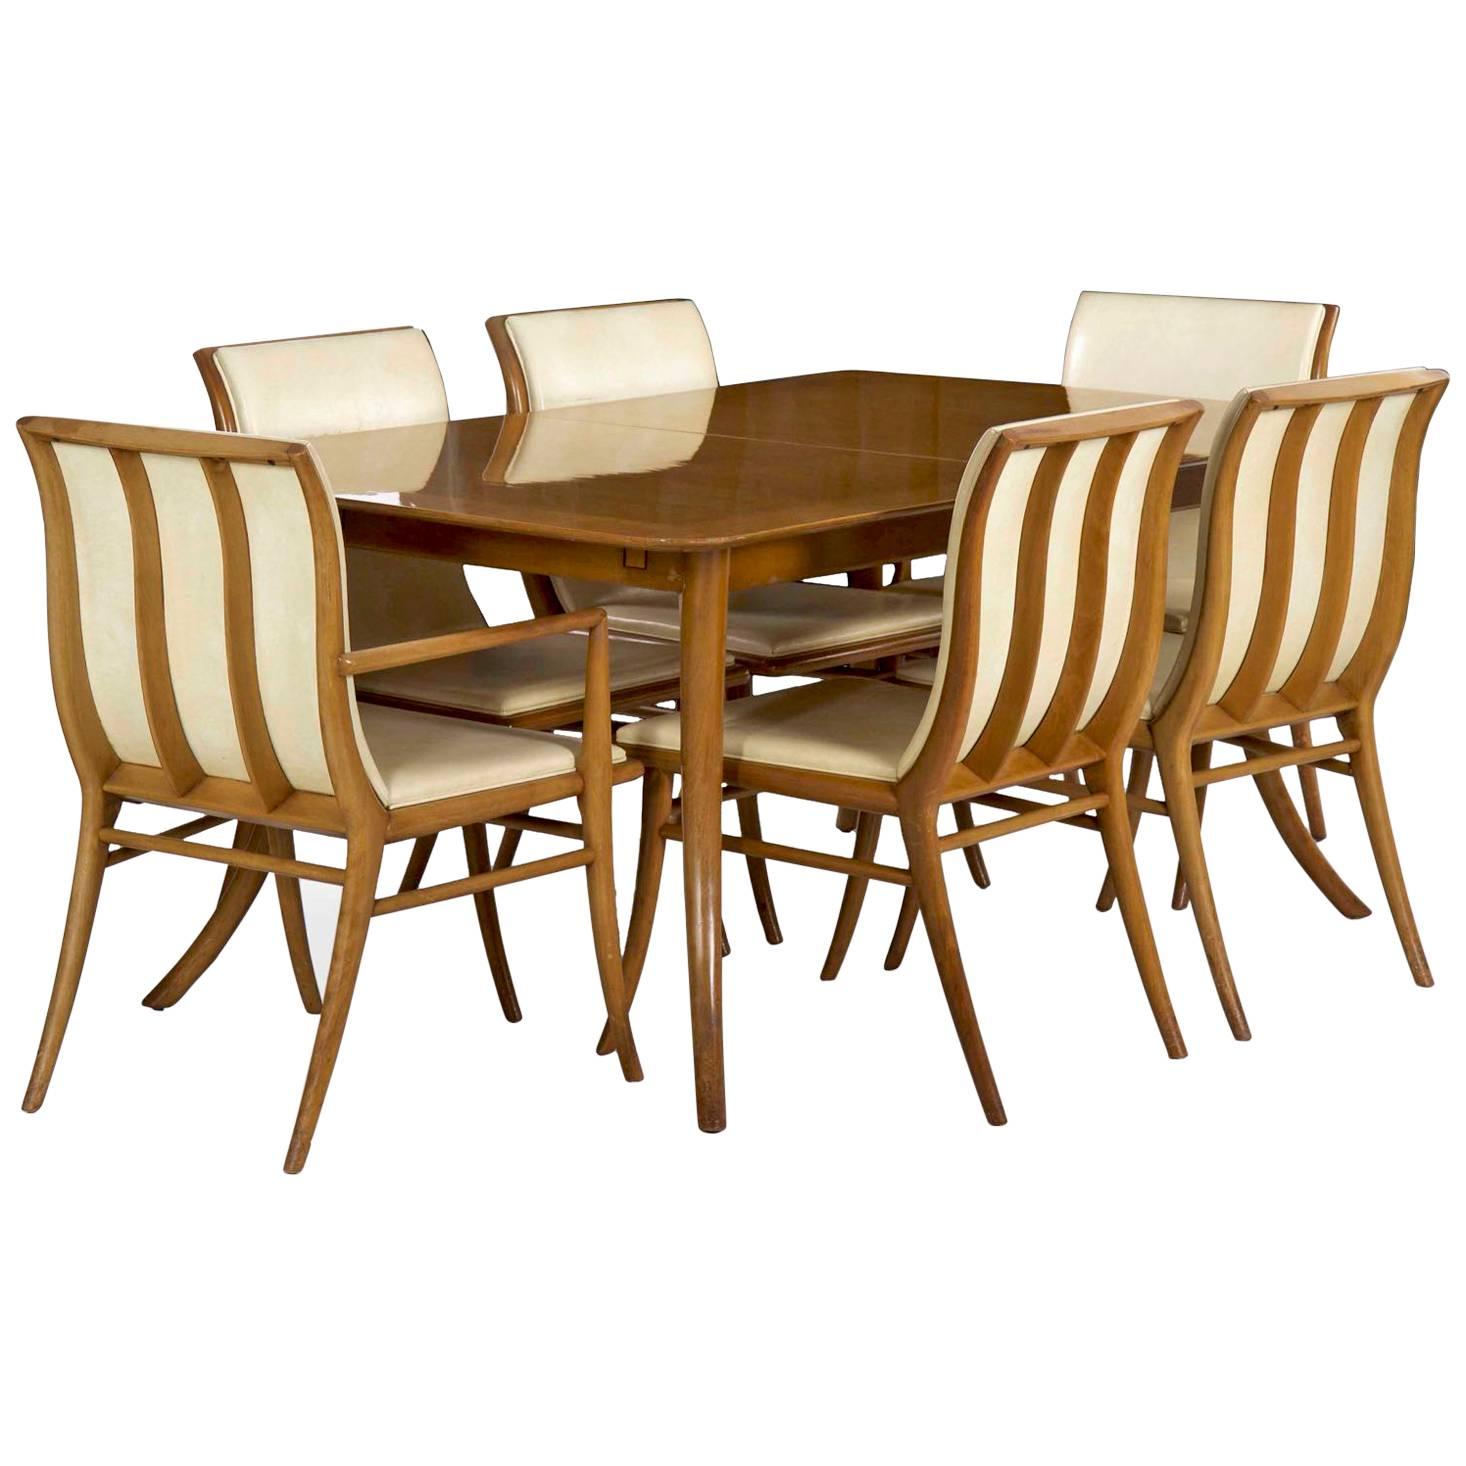 Mid-Century Modern Dining Table and Six Chairs by T.H. Robsjohn-Gibbings